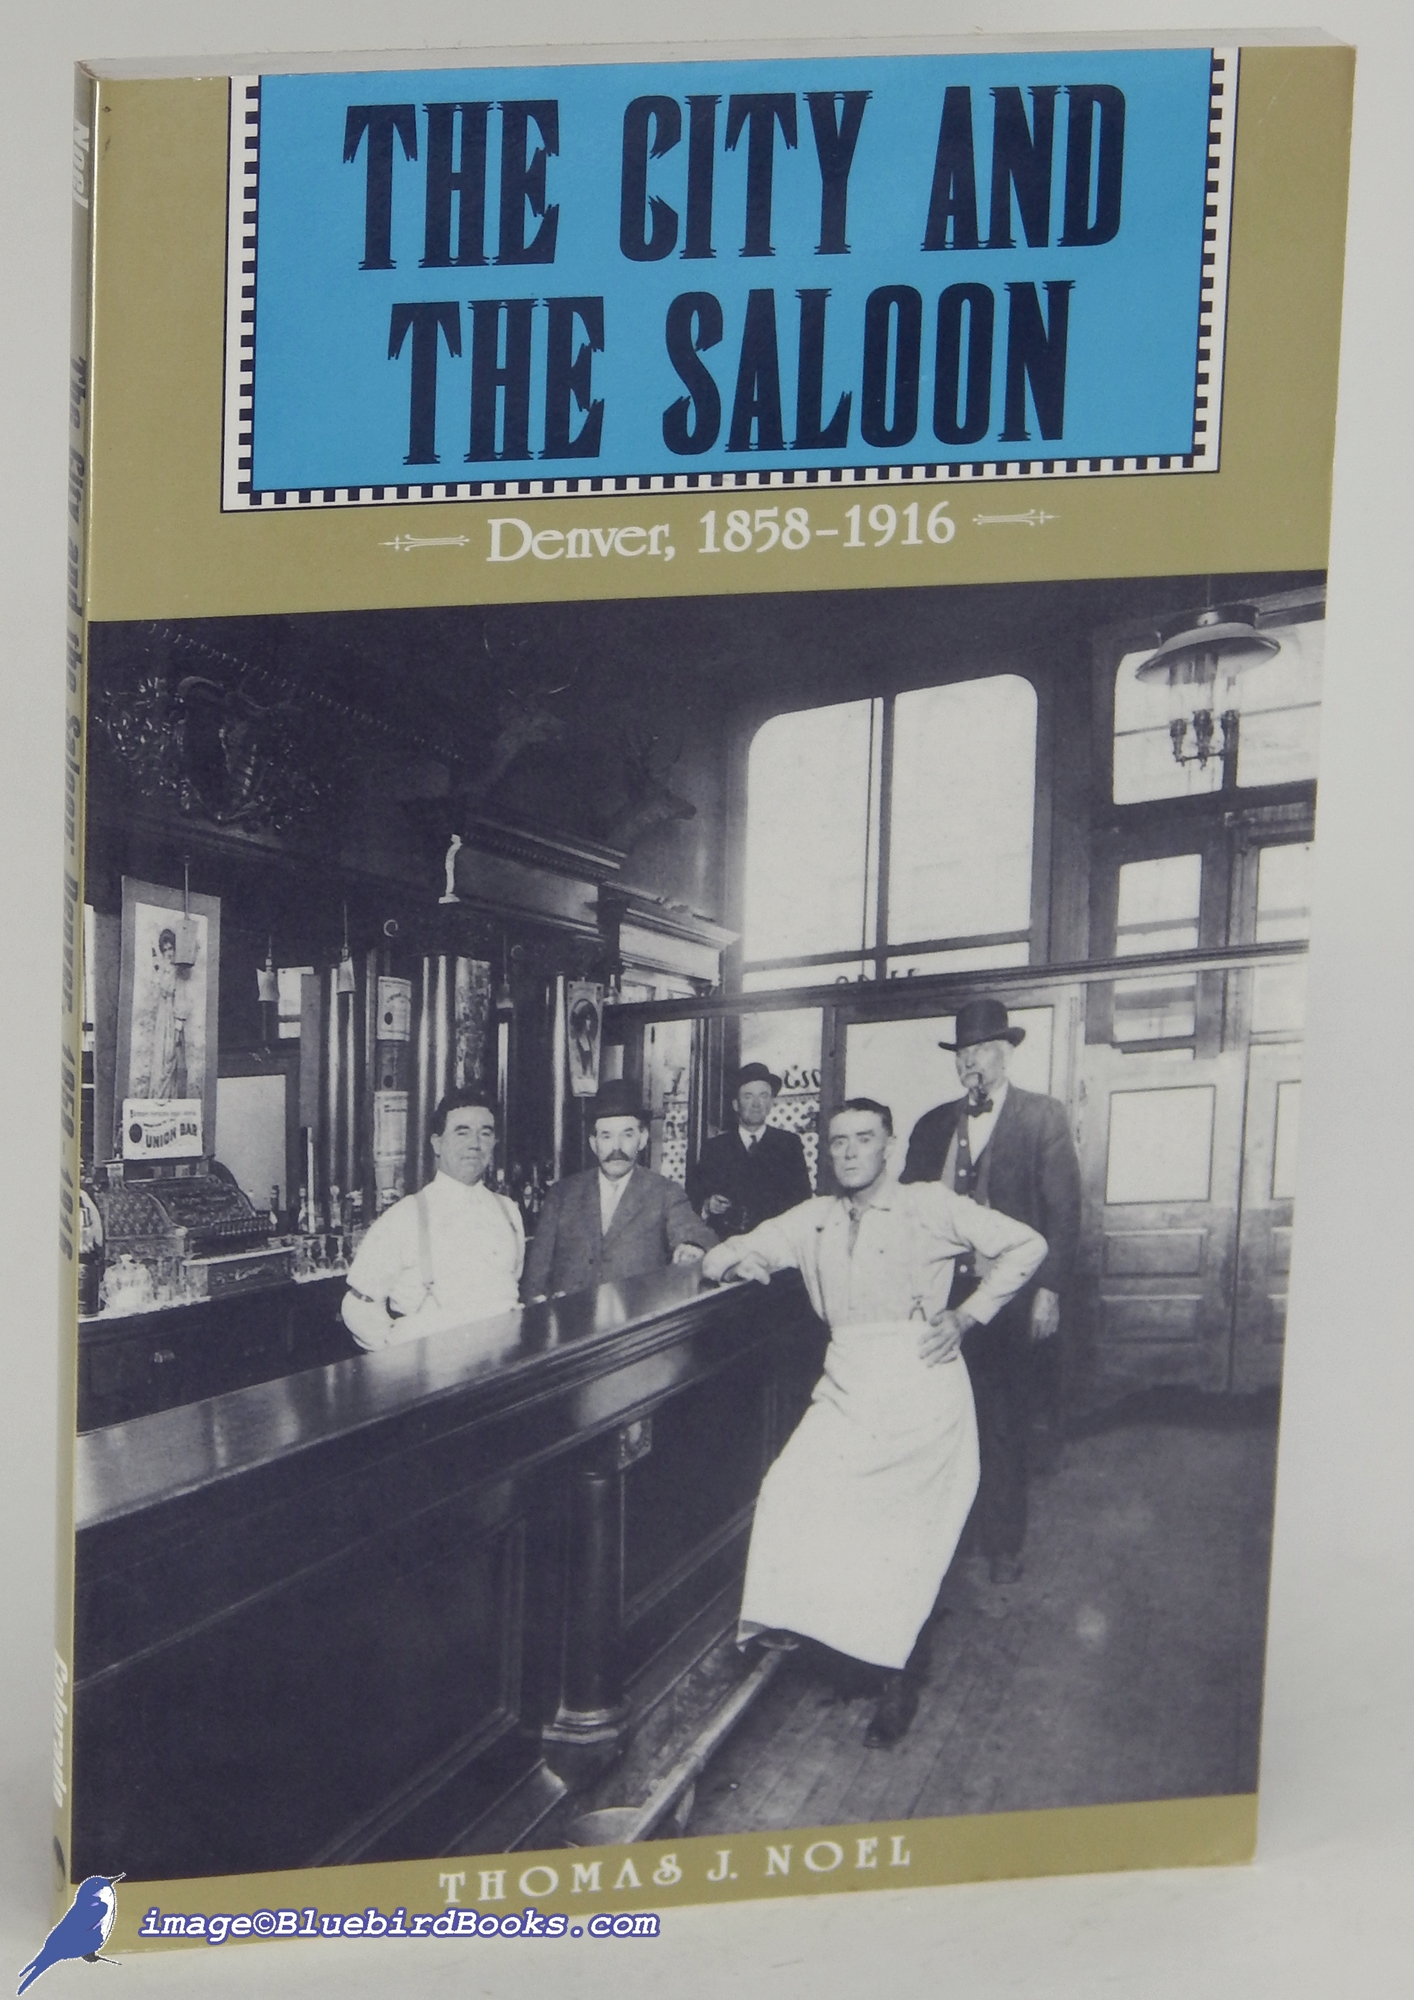 NOEL, THOMAS J. - The City and the Saloon: Denver, 1858-1916